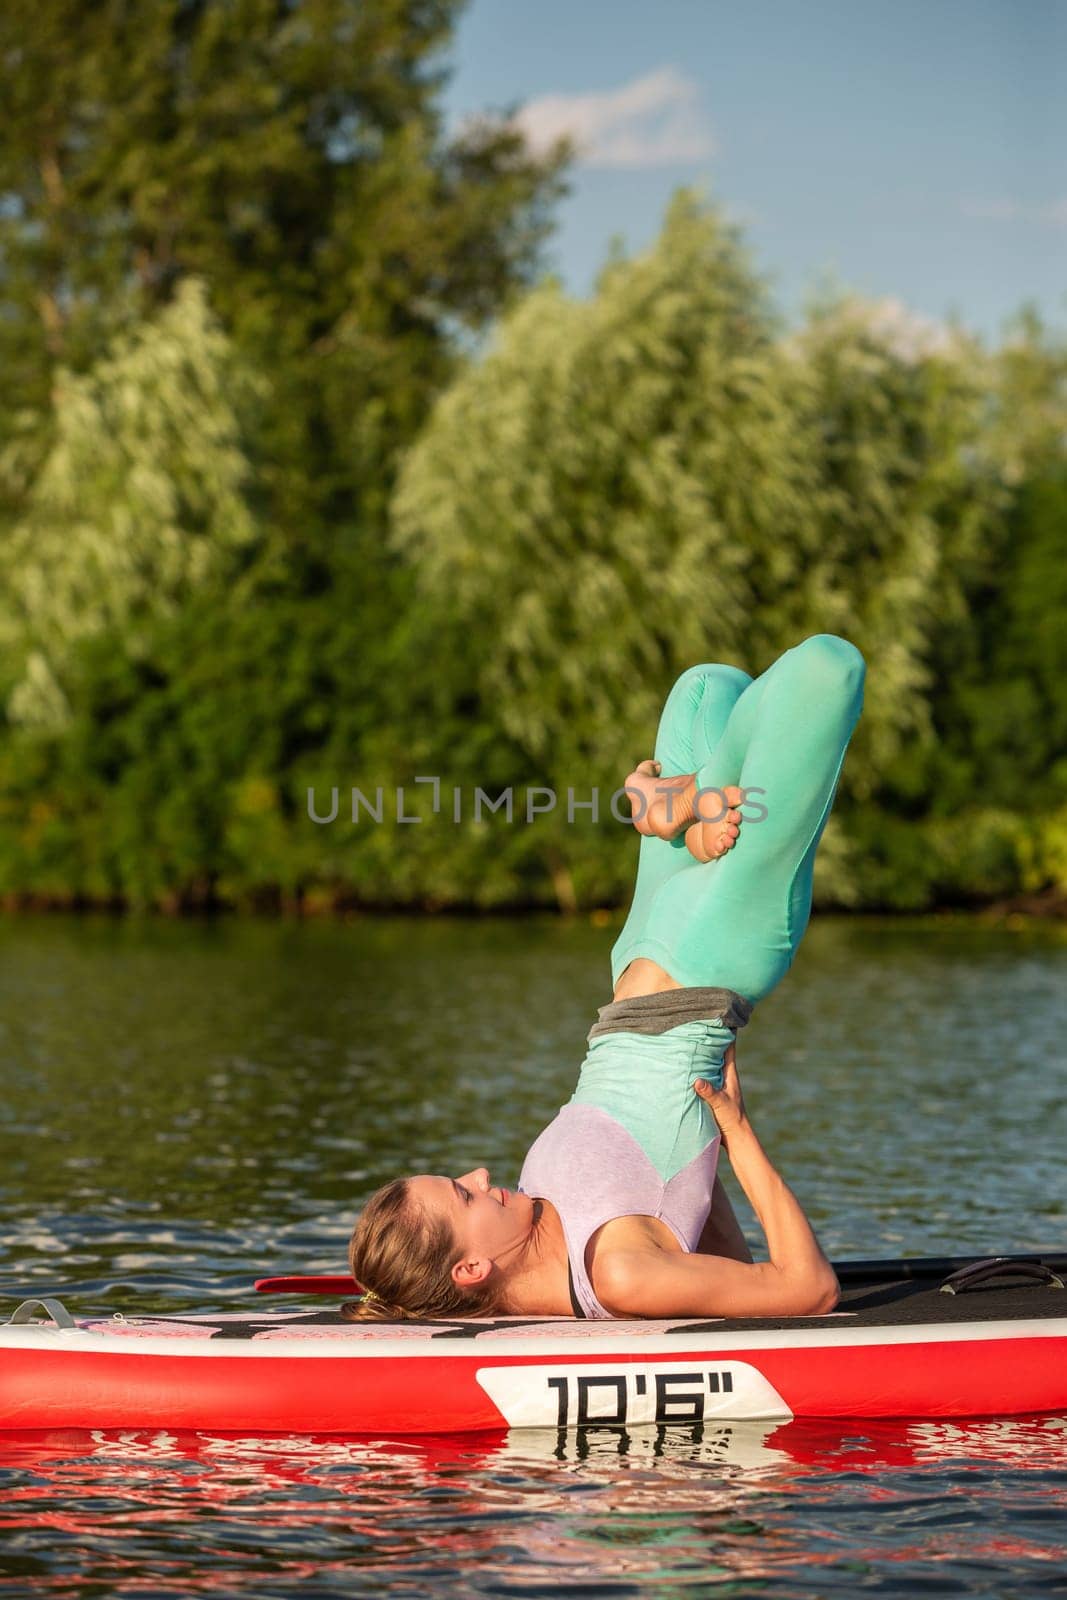 Woman practicing yoga on the paddle board in the morning by nazarovsergey